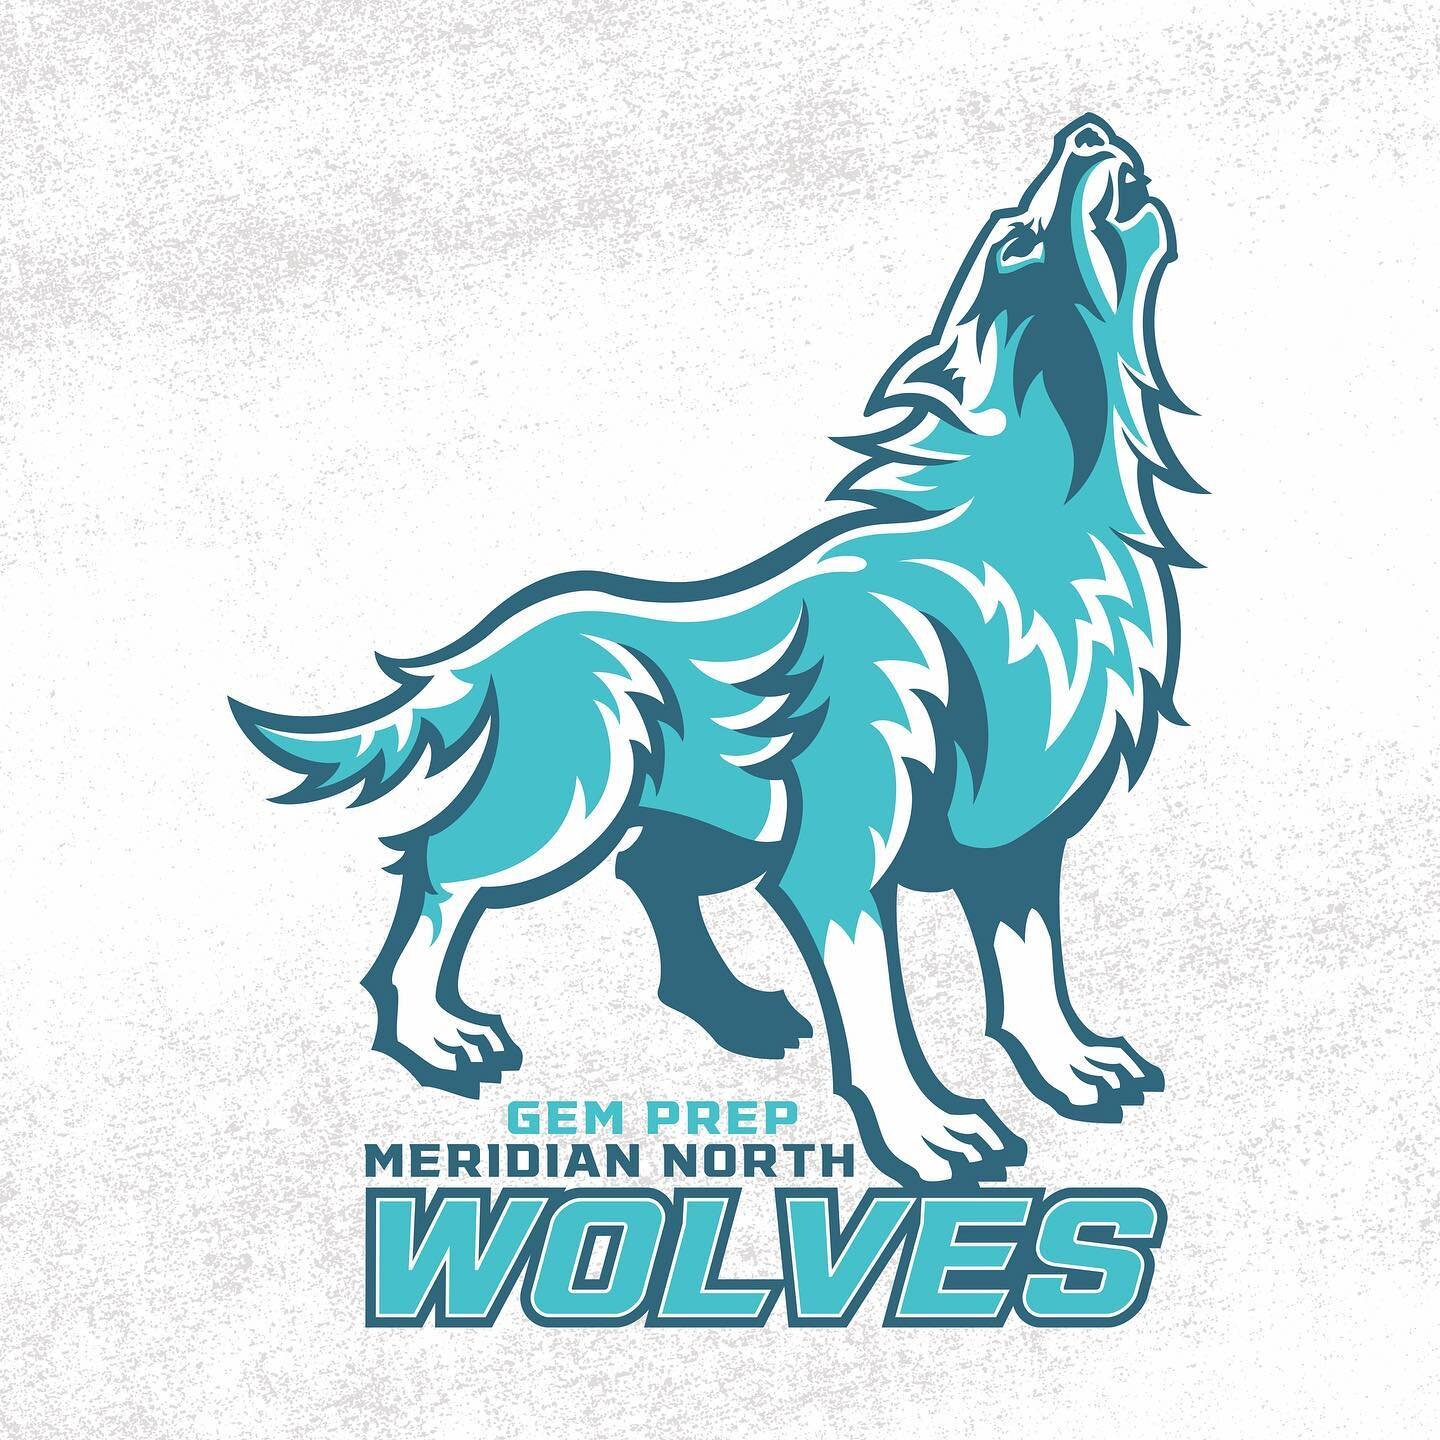 Even online schools need mascots. Wolves and Griffins for the Gem Prep Meridian and Meridian North locations. Fun work!

#boise #idaho #halfbasquejob #meridianidaho #gemprepmeridian #gemprepcharter #mascot #logodesign #vector #illustrator #adobeillus